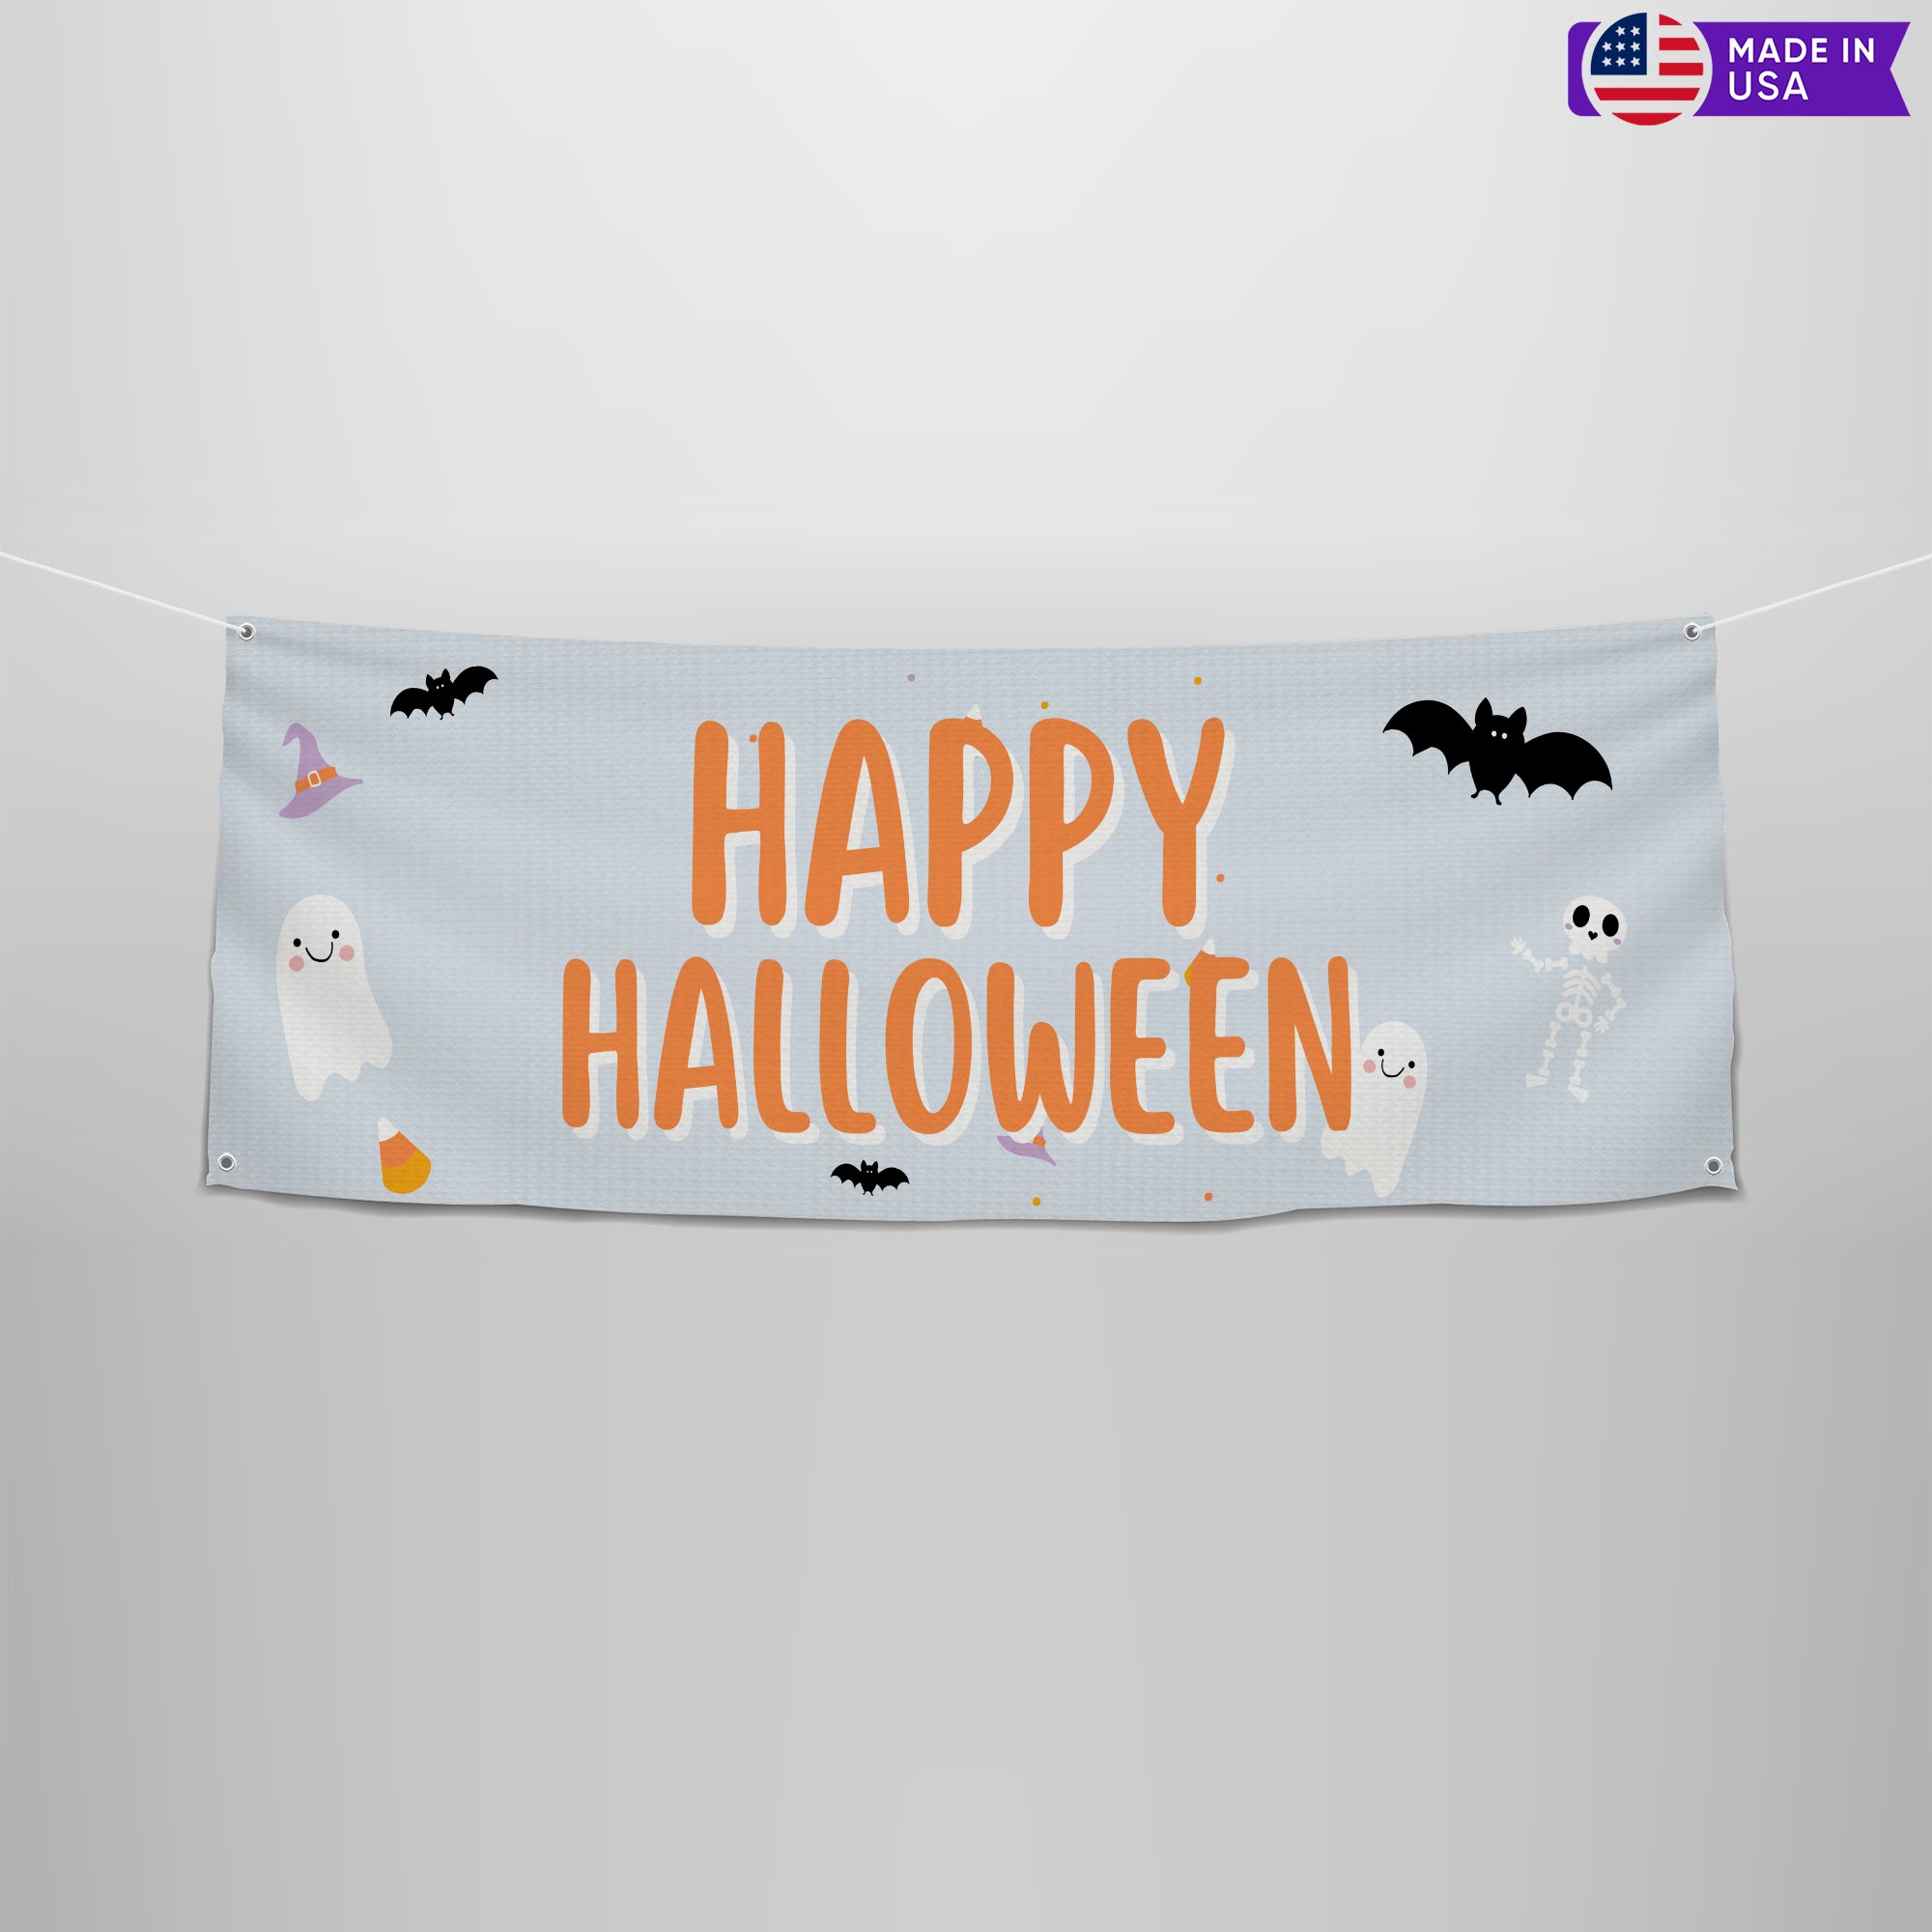 Happy Halloween Bat Ghosts Large Banner with Spooktacular Features